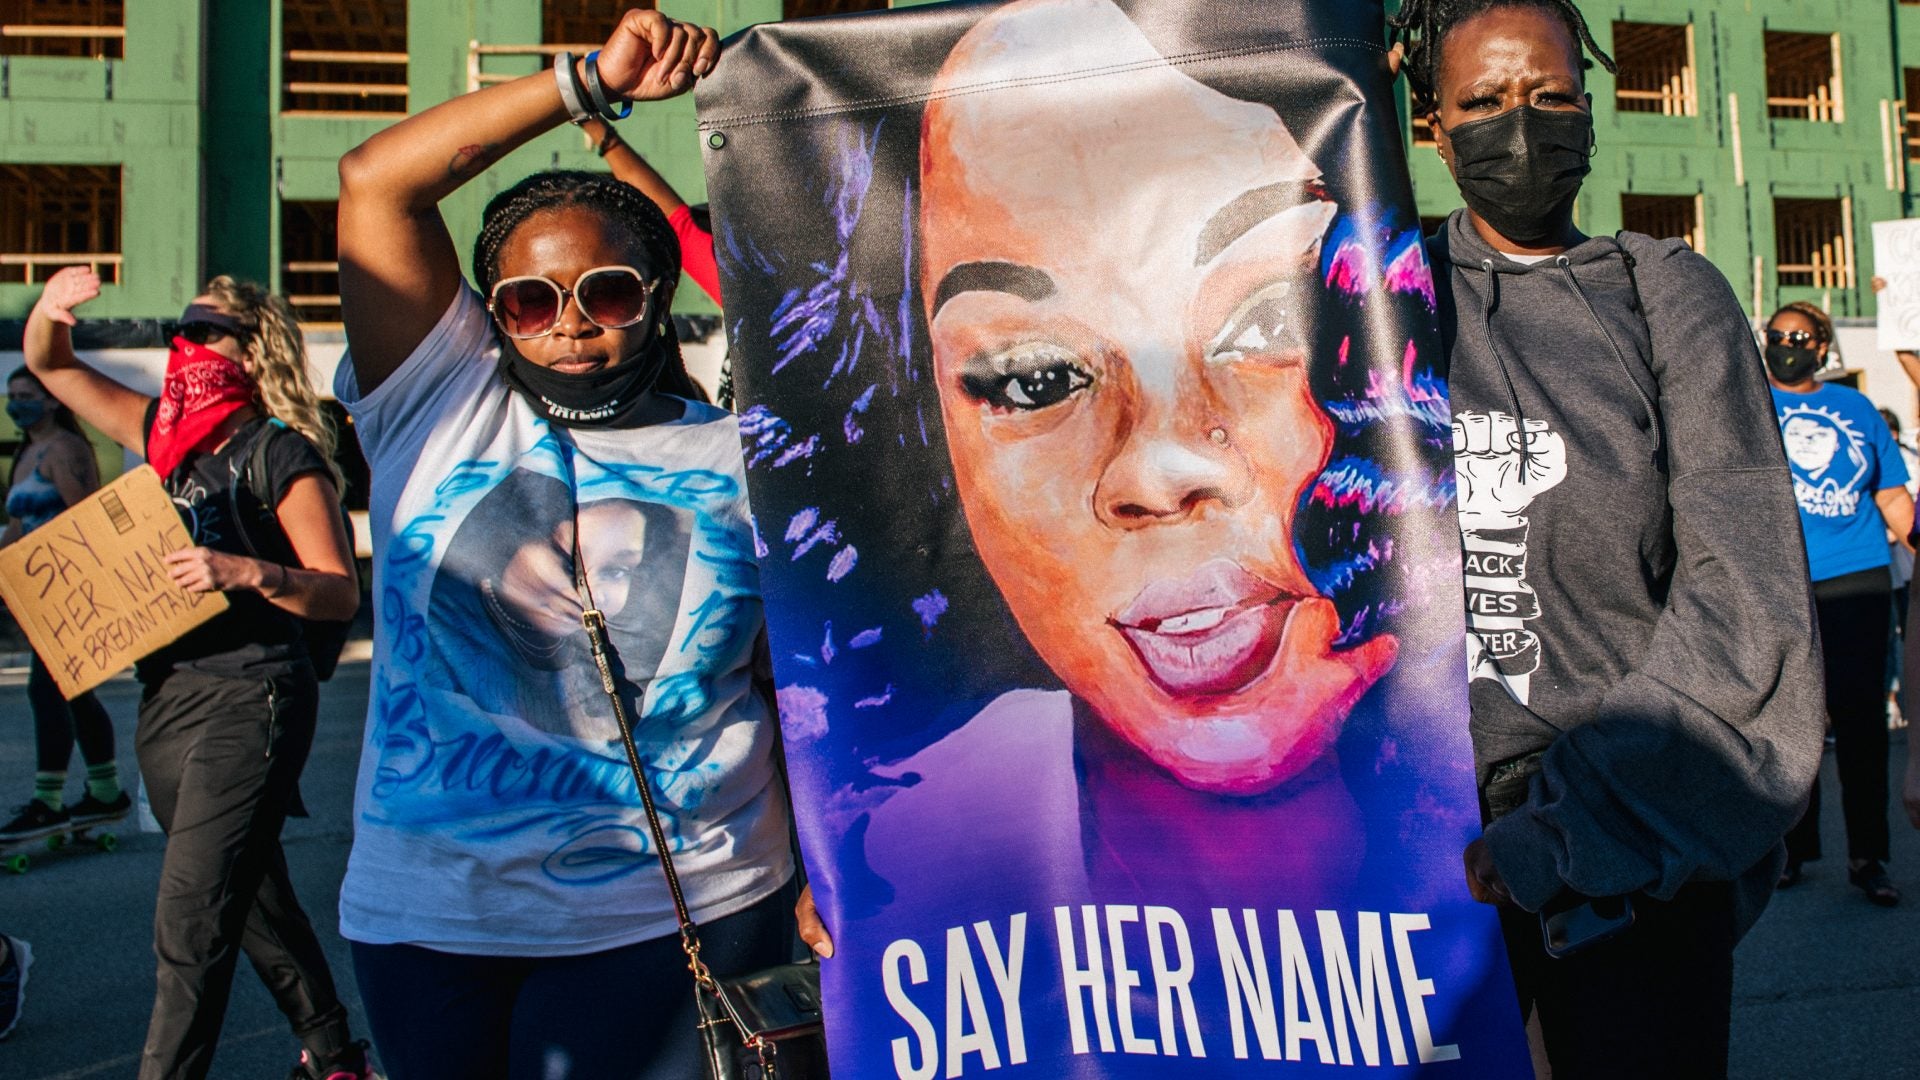 The Louisville Officer Who Fatally Shot Breonna Taylor Wants His Job Back